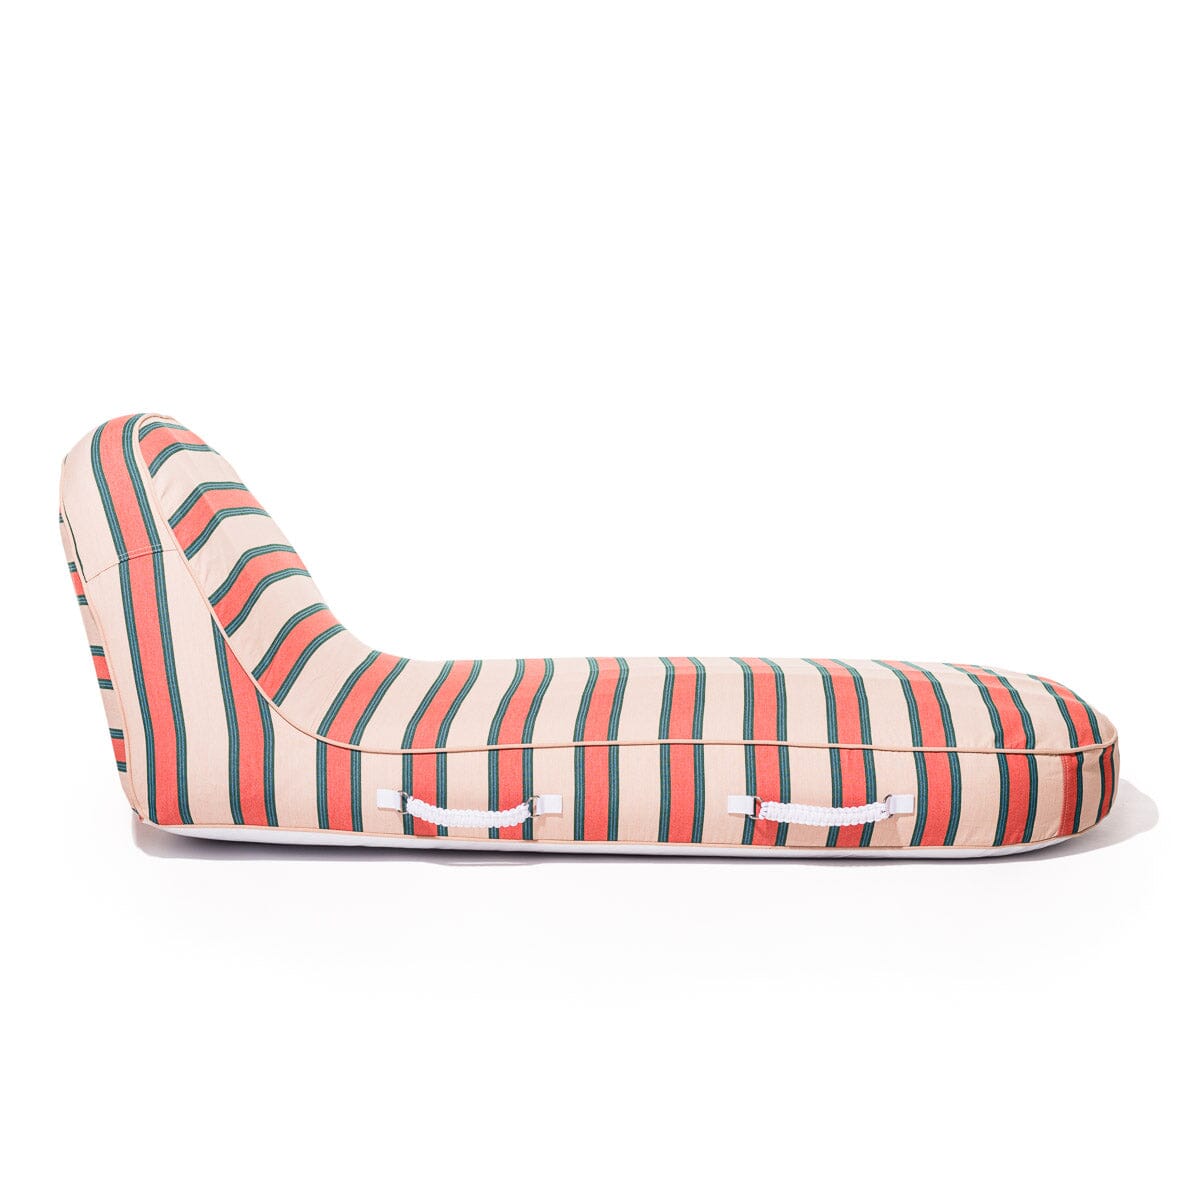 The Pool Lounger - Bistro Dusty Pink Stripe Pool Lounger Business & Pleasure Co 